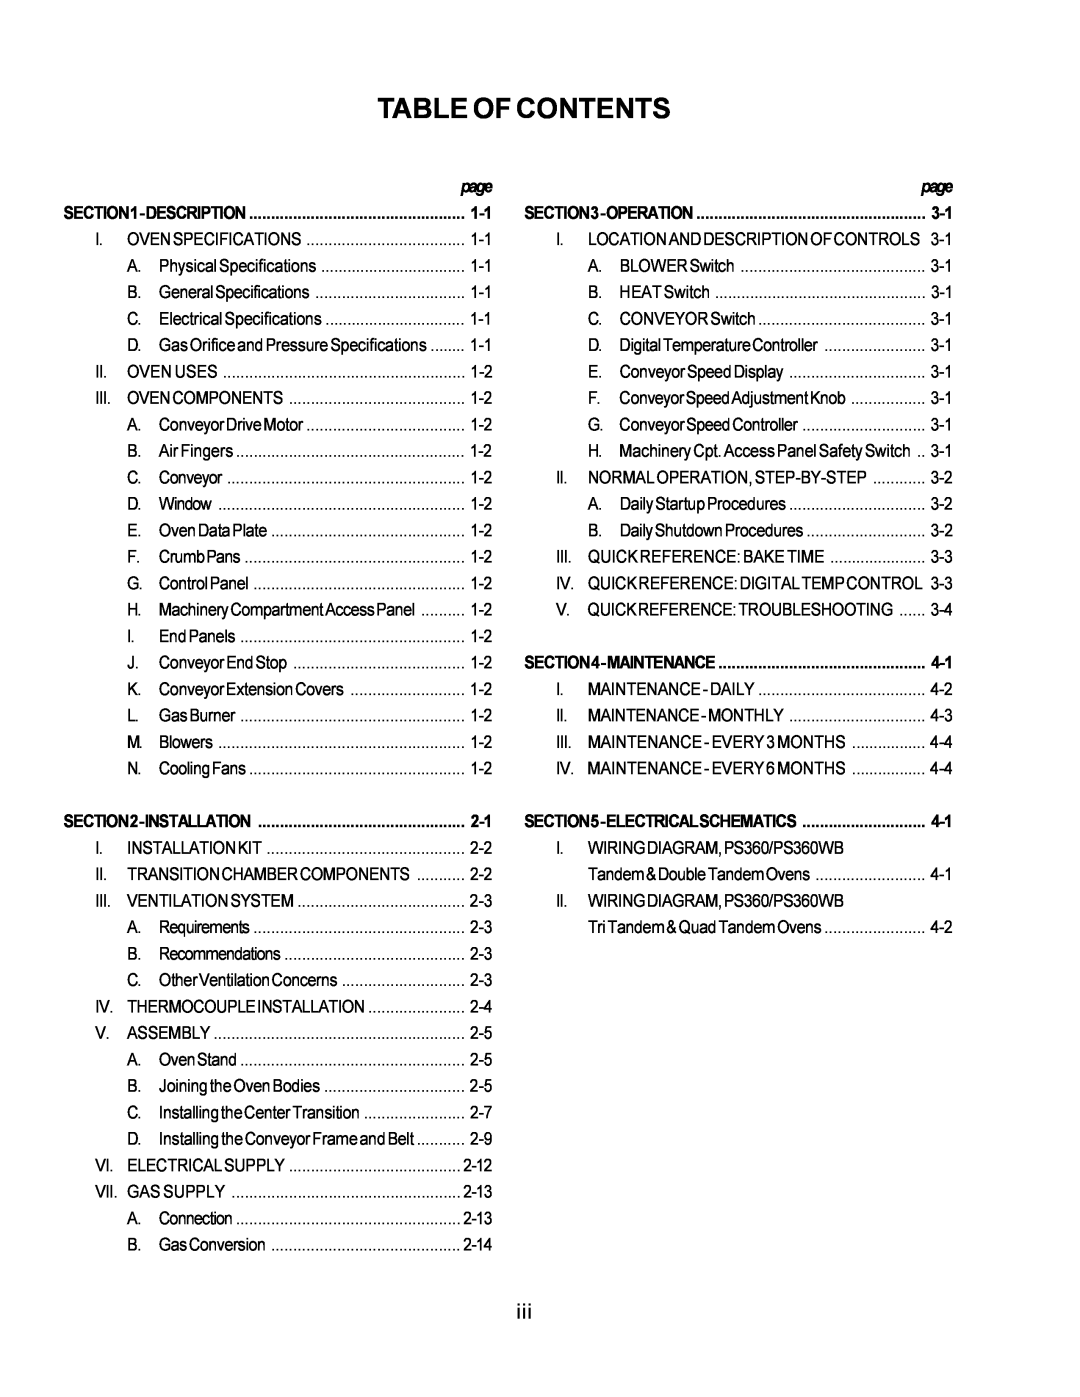 Middleby Marshall PS360 installation manual Table Of Contents, page 